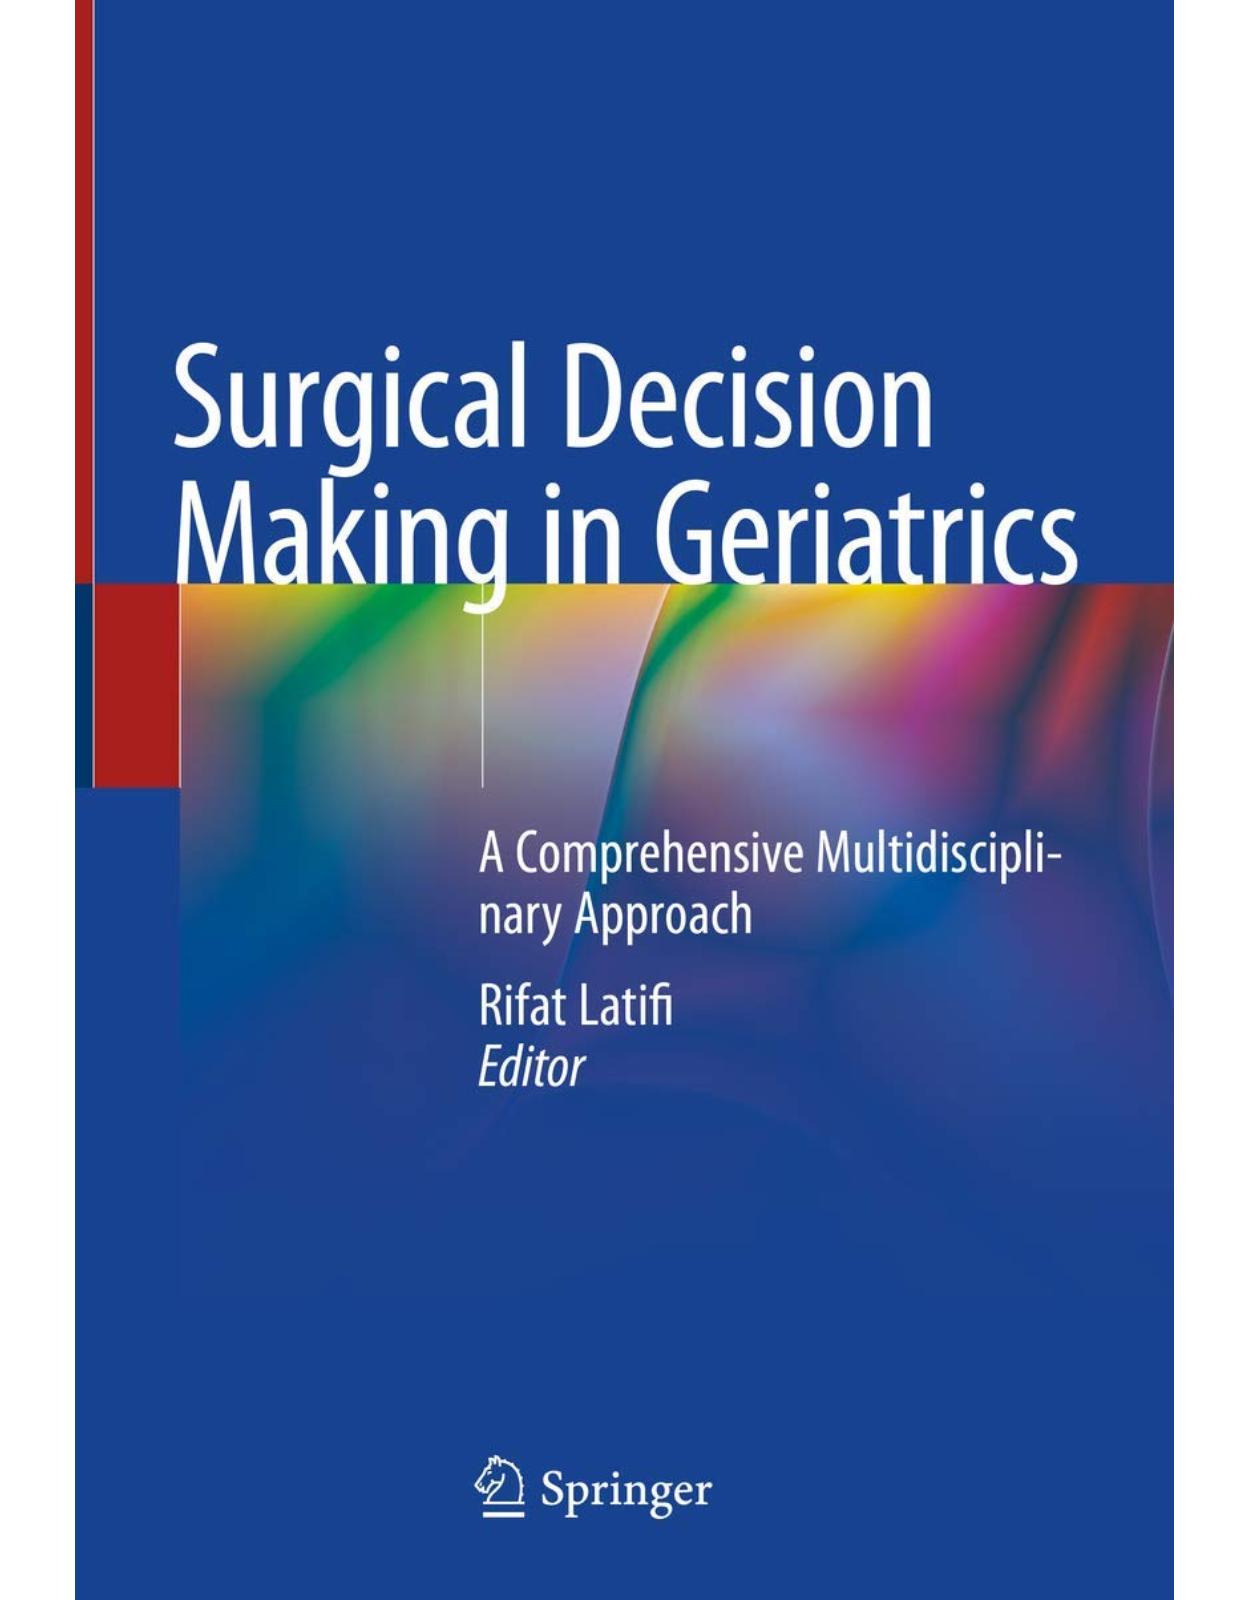 Surgical Decision Making in Geriatrics: A Comprehensive Multidisciplinary Approach